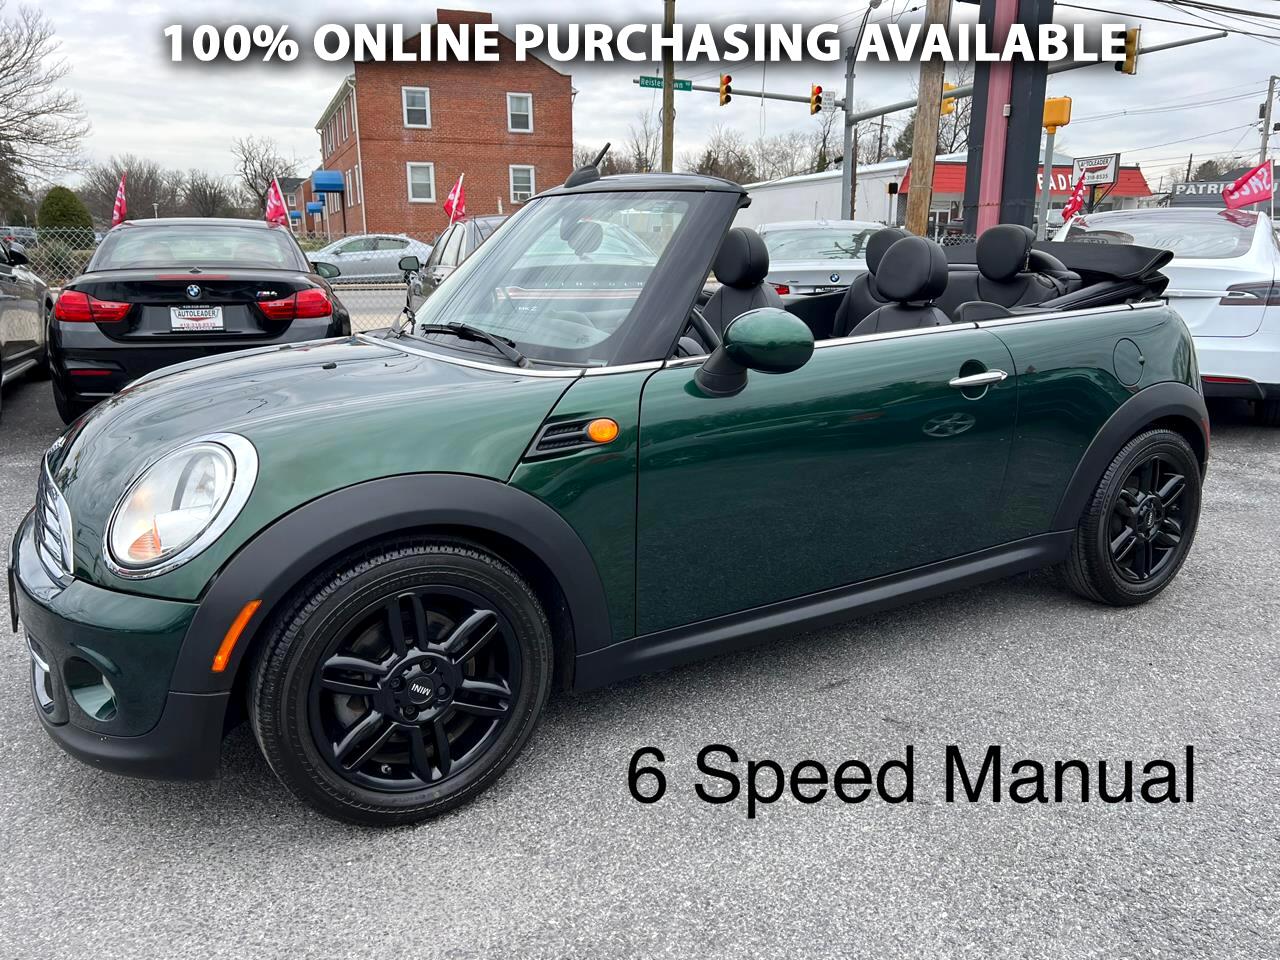 Used 2014 MINI Cooper Convertible 2dr for Sale in Baltimore MD 21215  Autoleader